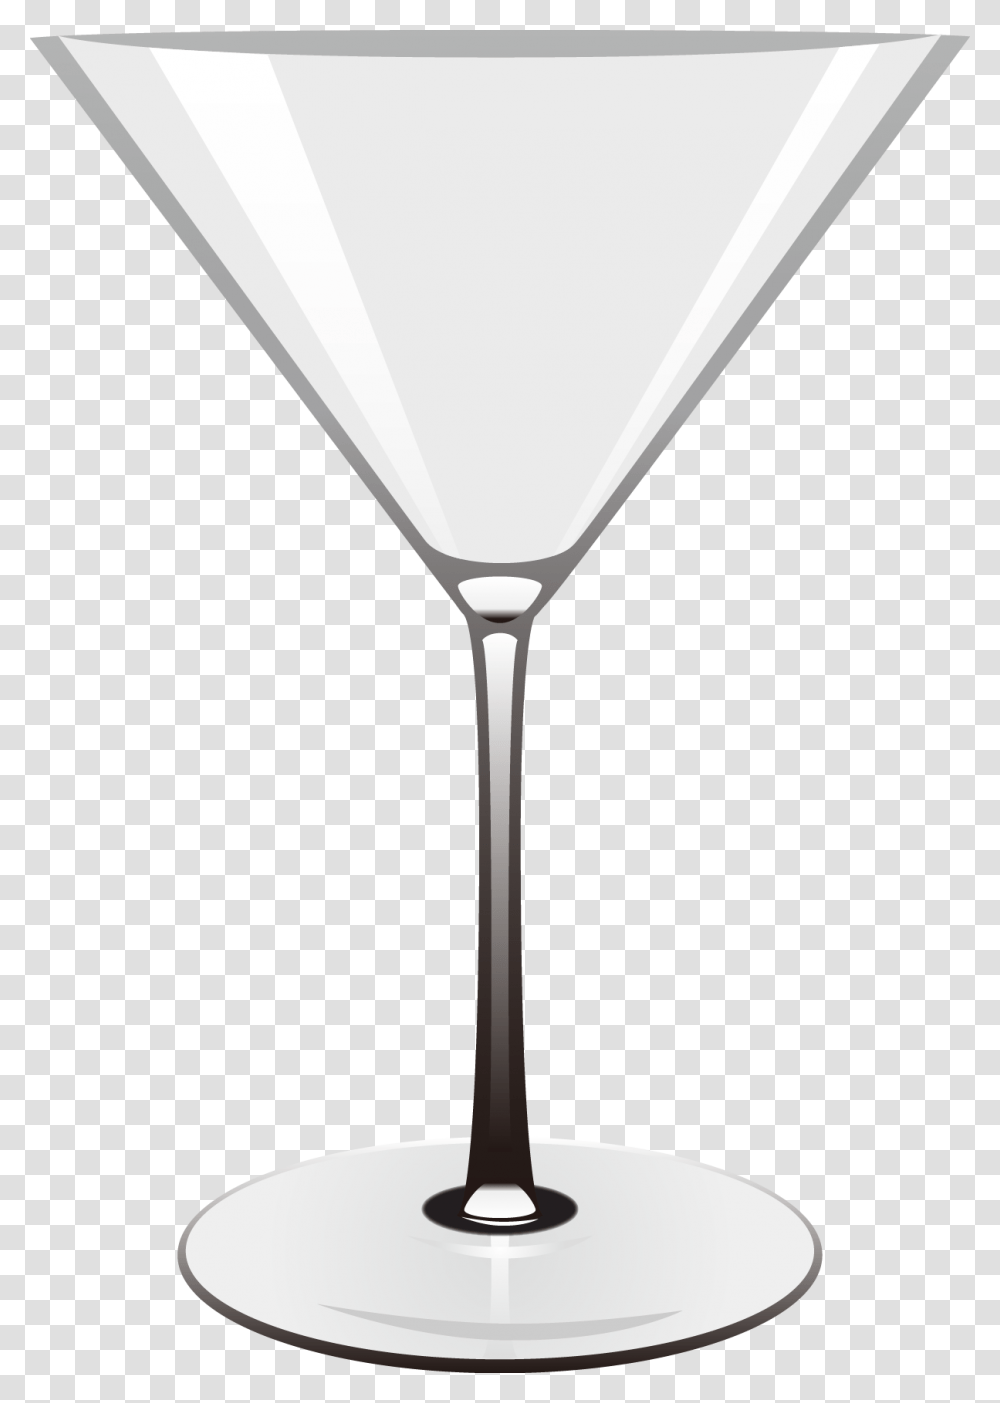 Martini Cocktail Glass Wine Glass Tea Wine Glass, Alcohol, Beverage, Drink, Lamp Transparent Png